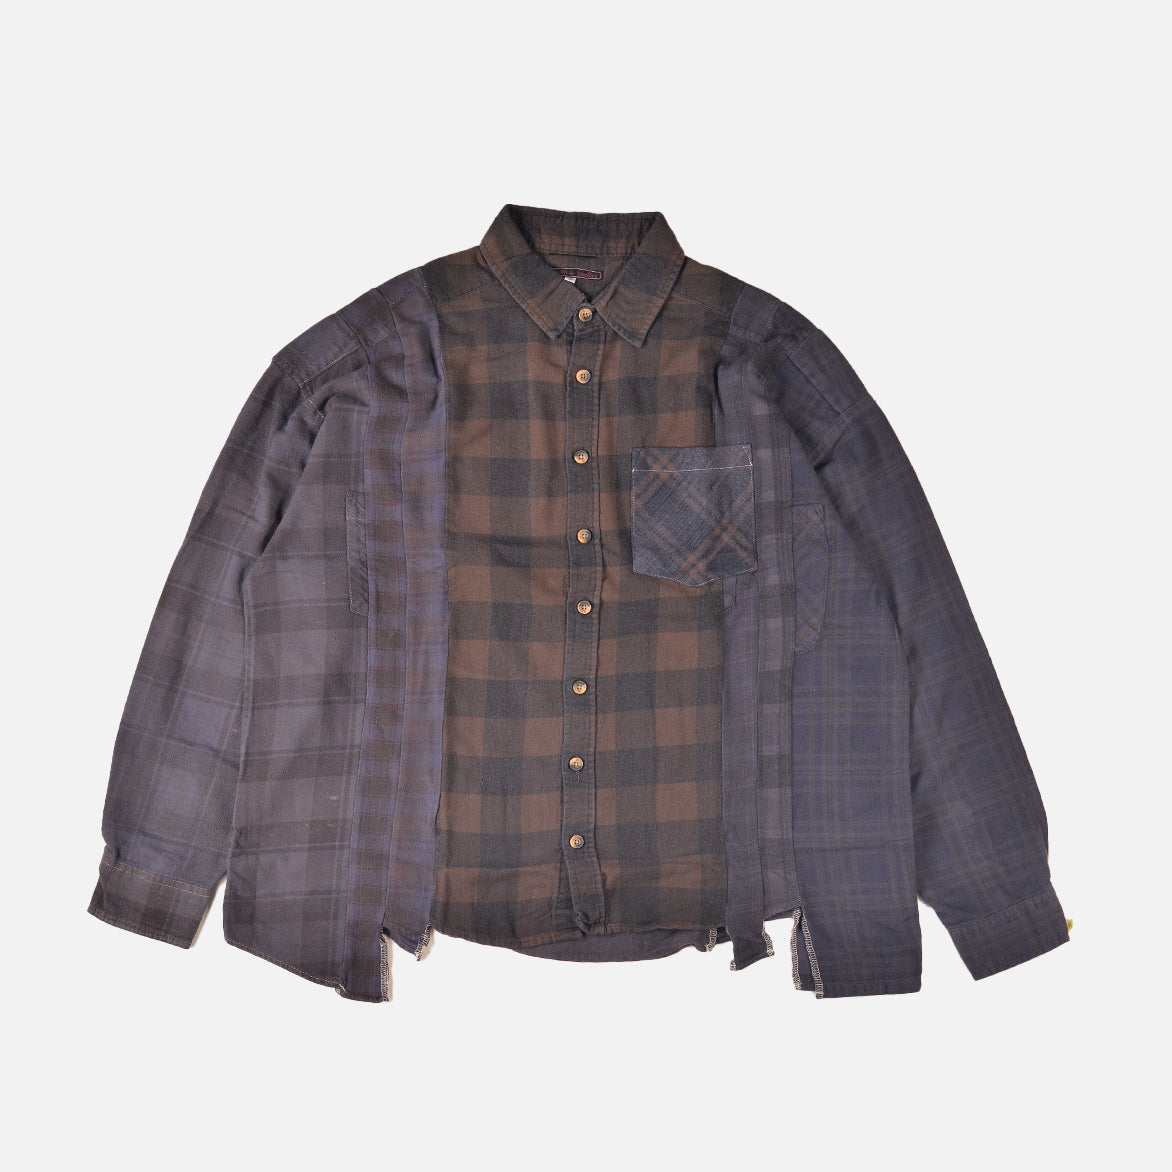 FLANNEL SHIRT -> 7 CUTS SHIRT / OVER DYE - LARGE 2